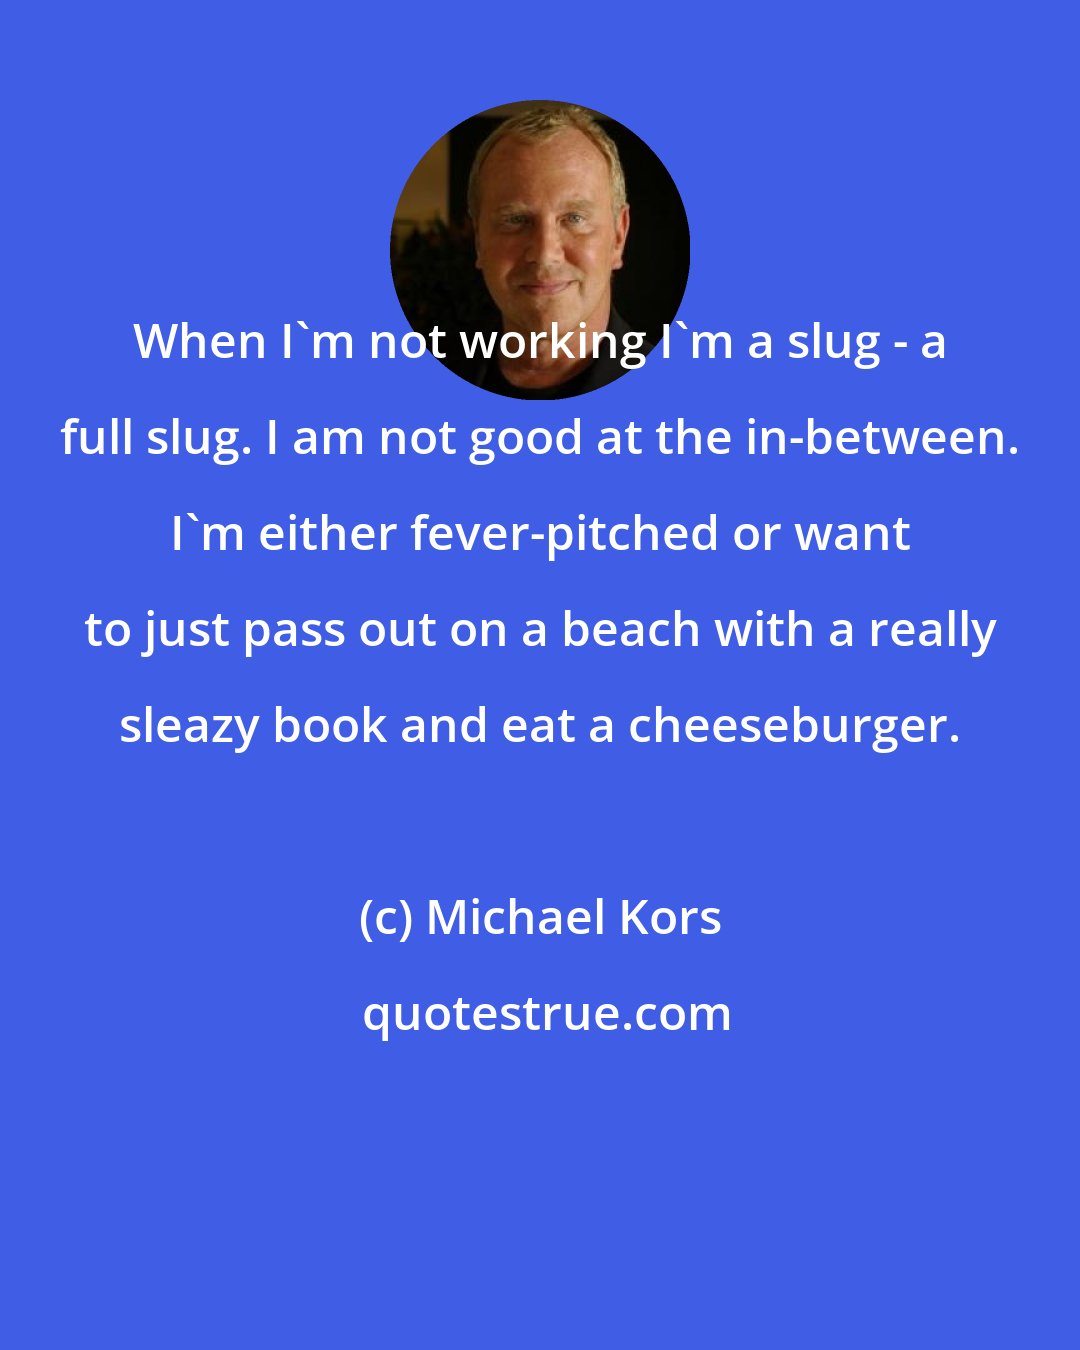 Michael Kors: When I'm not working I'm a slug - a full slug. I am not good at the in-between. I'm either fever-pitched or want to just pass out on a beach with a really sleazy book and eat a cheeseburger.